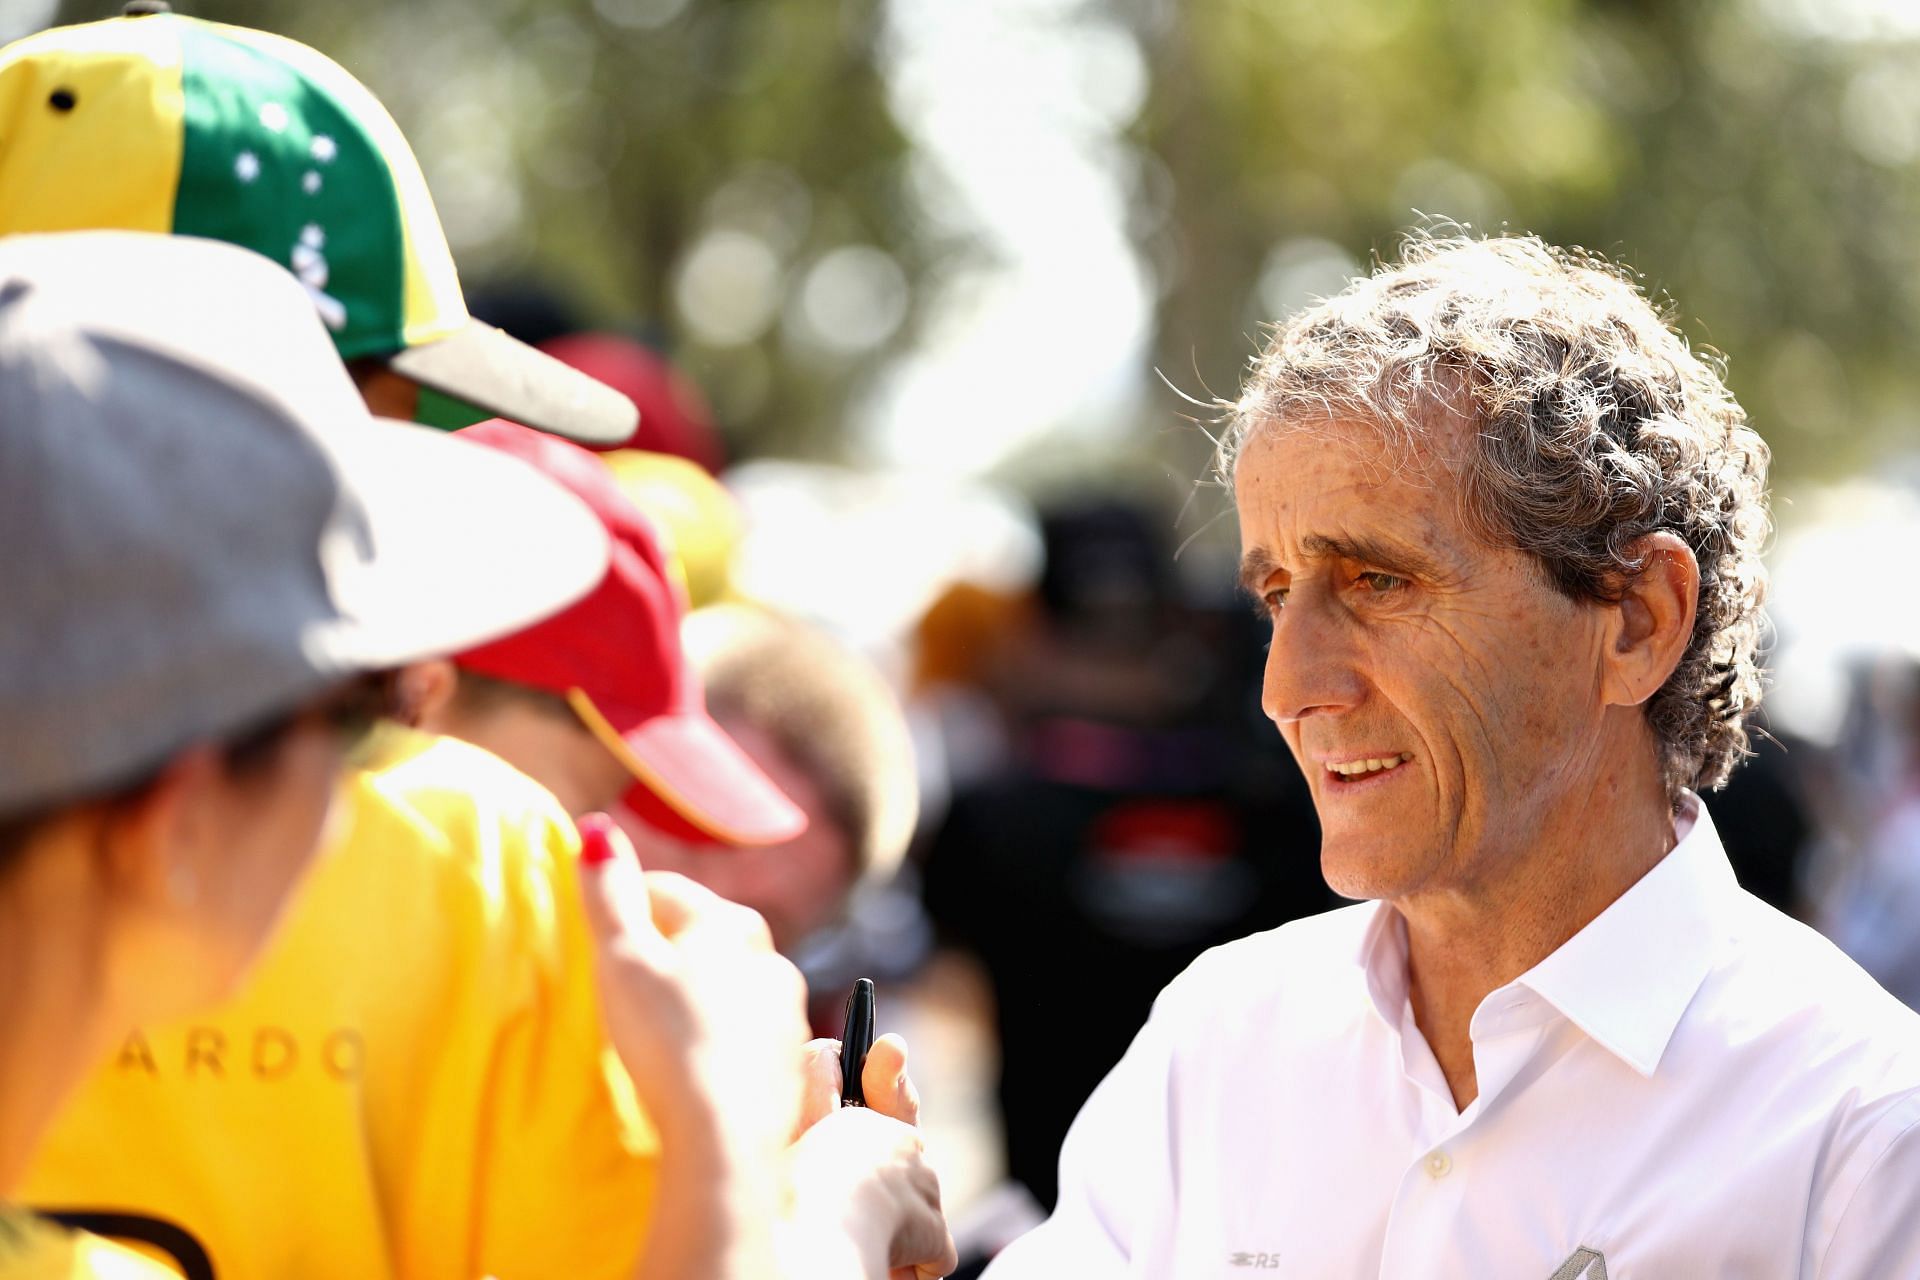 Alain Prost (right) at the 2017 Australian Grand Prix (Photo by Robert Cianflone/Getty Images)